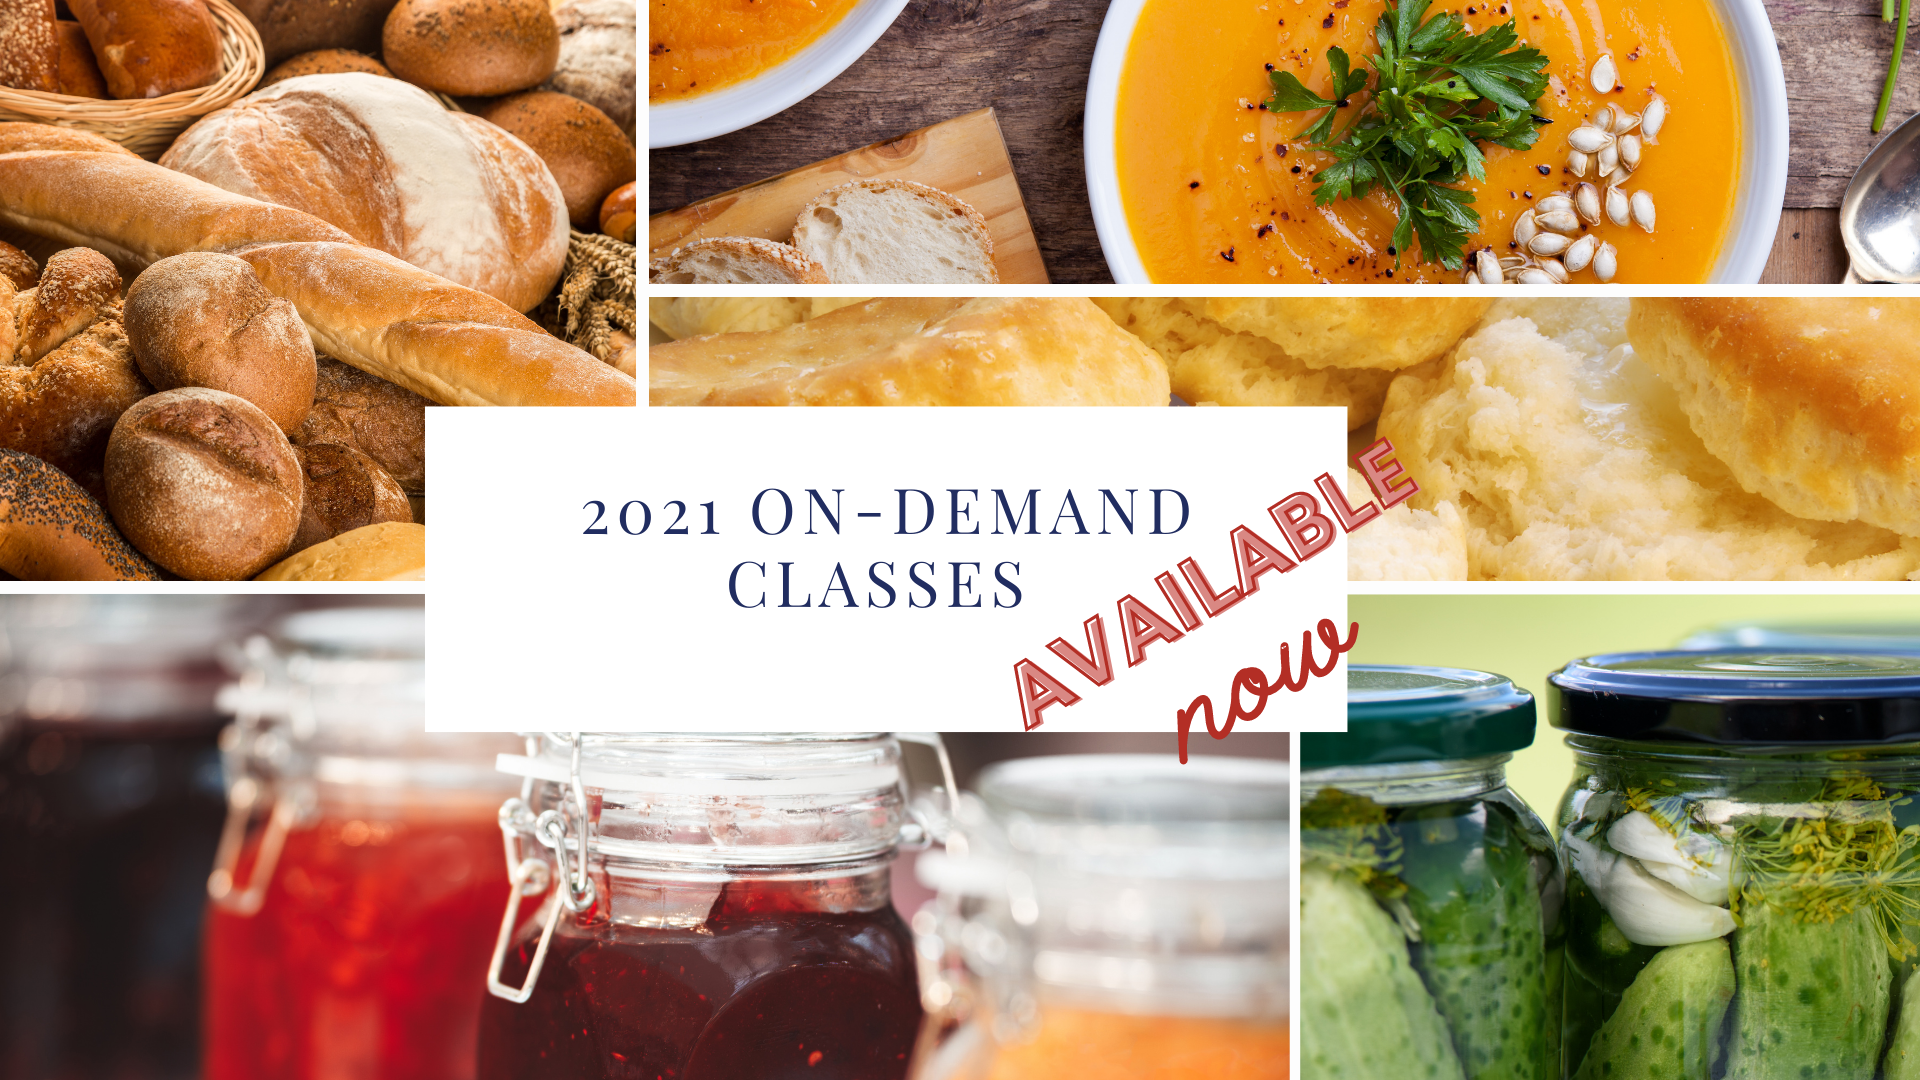 soups , breads, pickles and jellies flier for on demand food classes